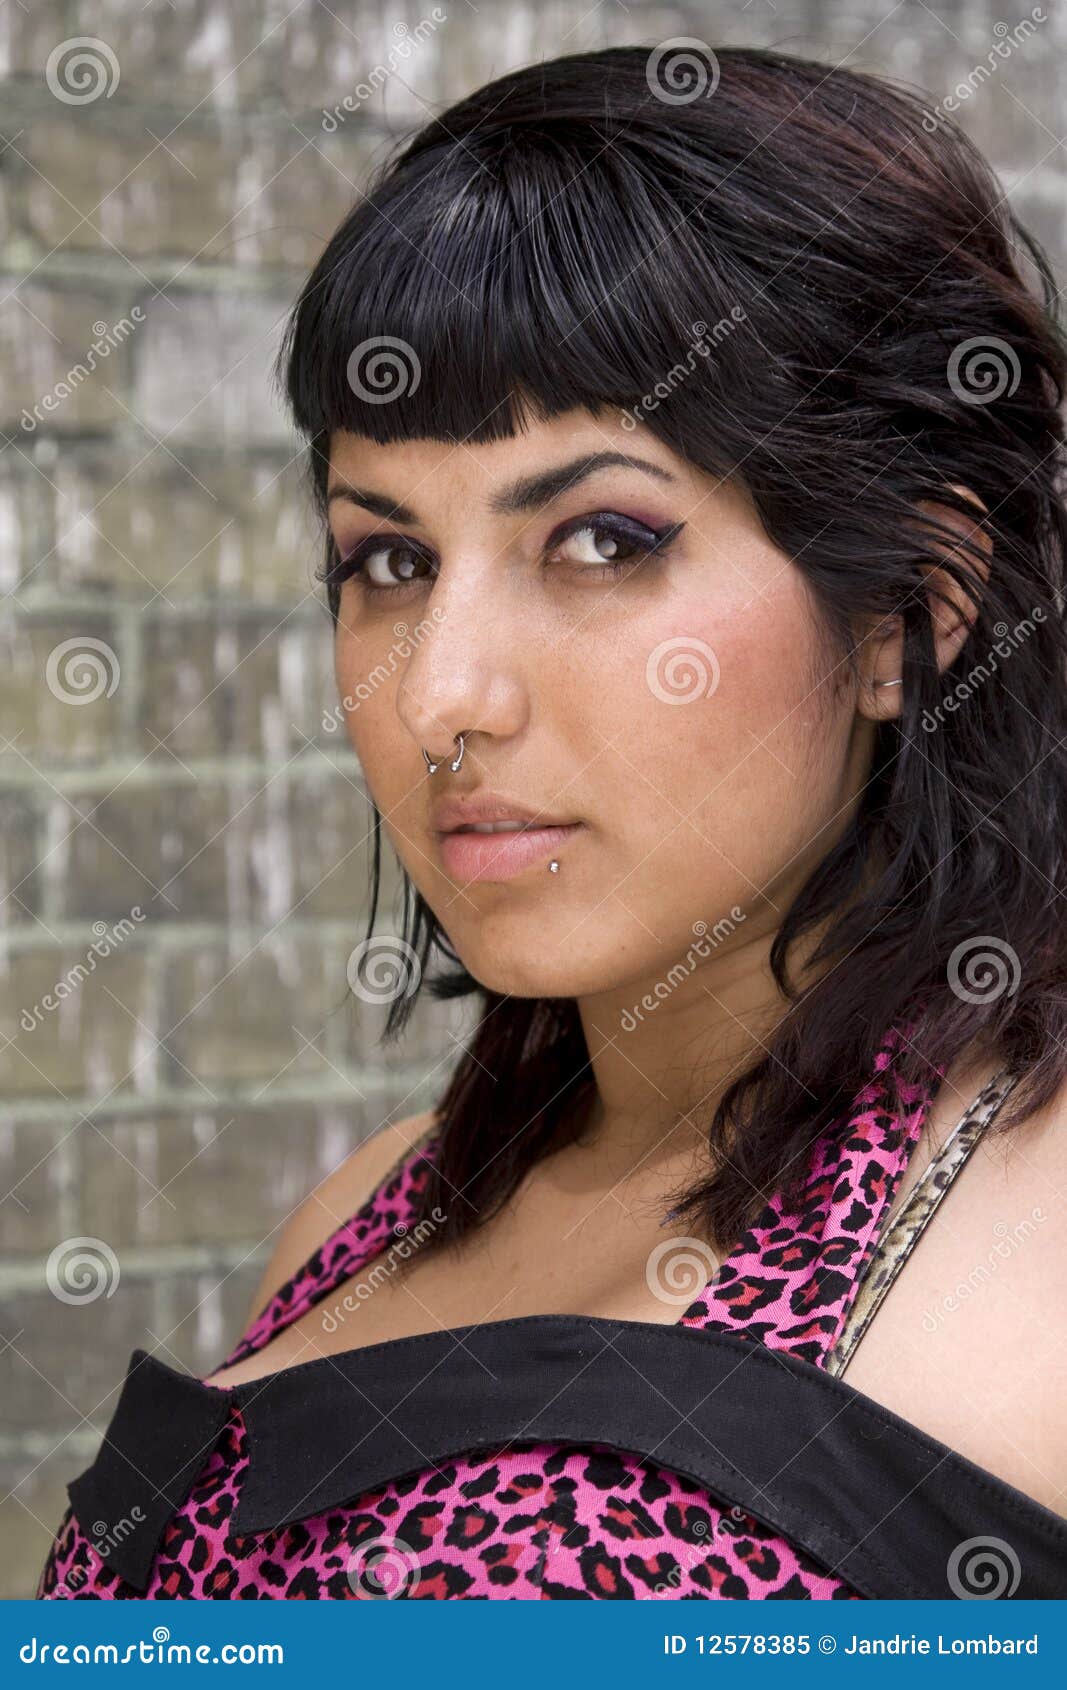 Model with piercings. Portrait of attractive young female with piercings in nose and lips